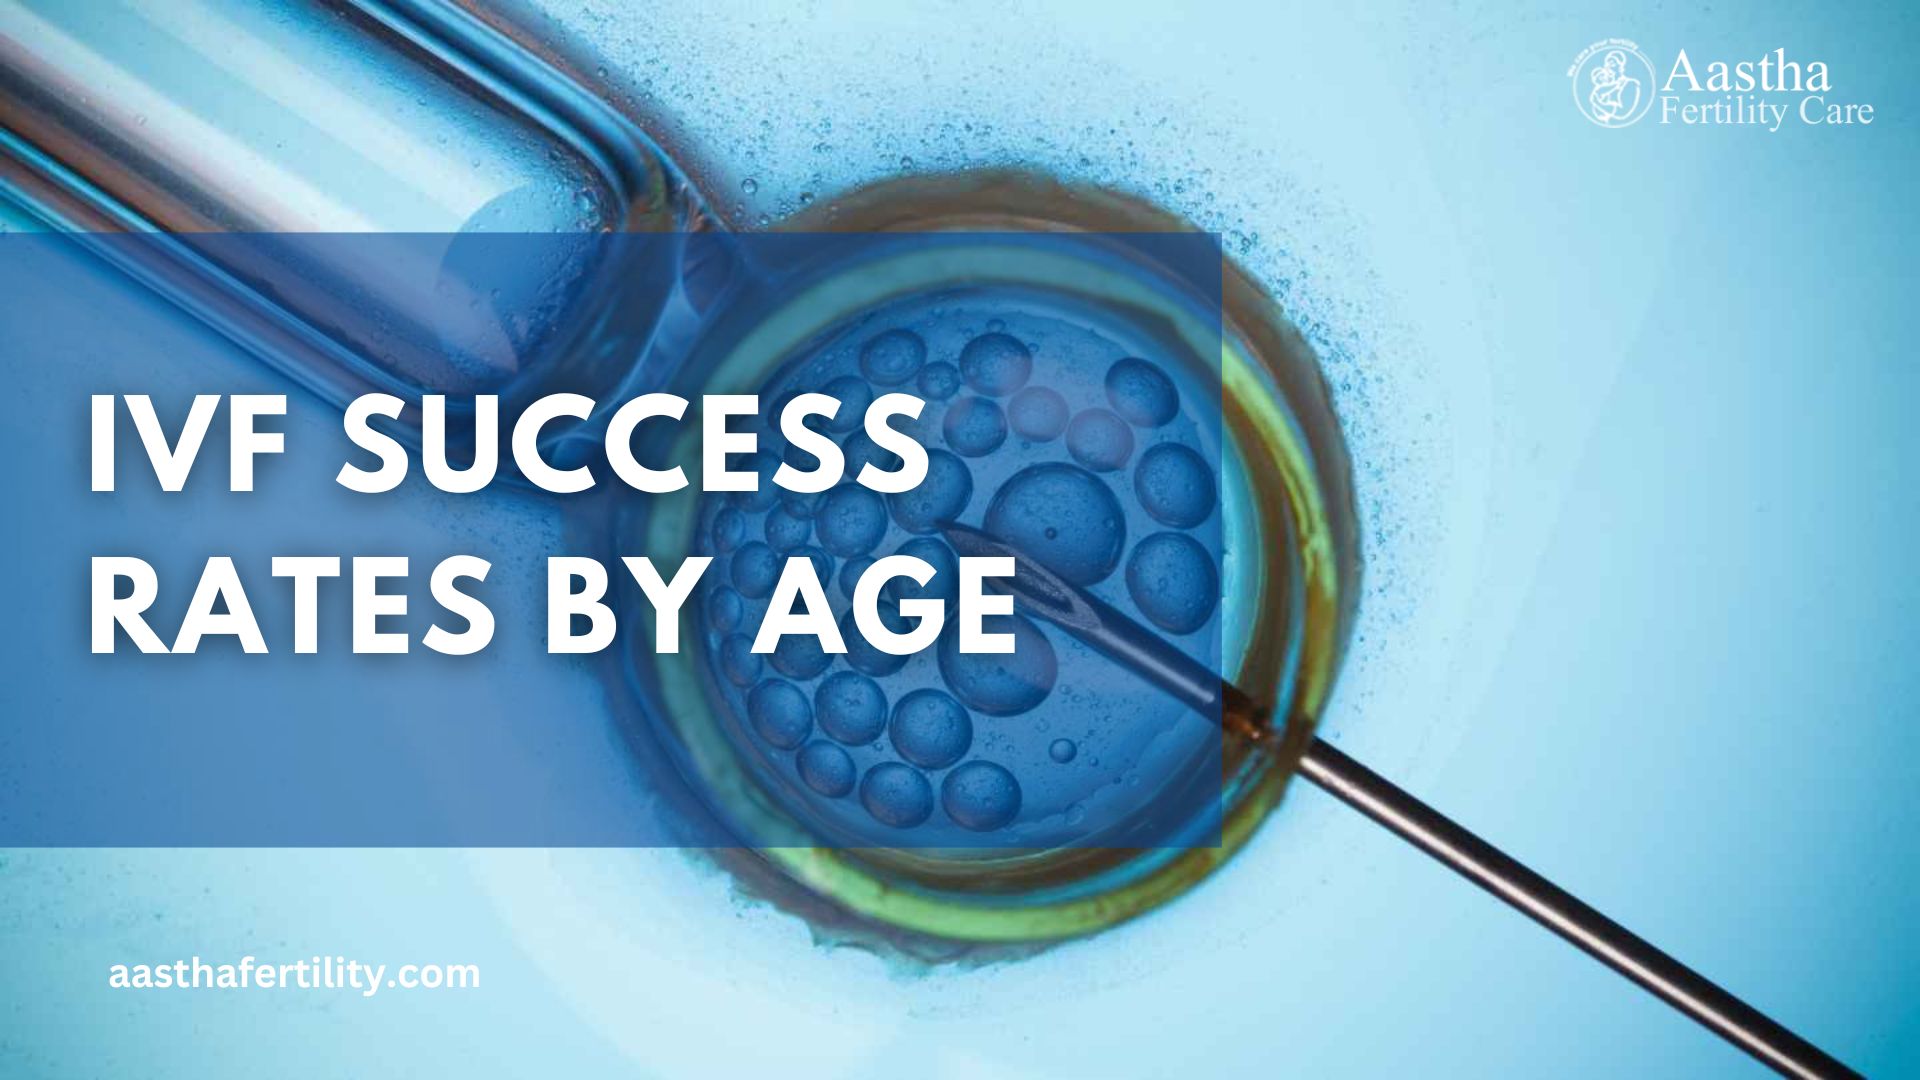 IVF Success Rate by Age